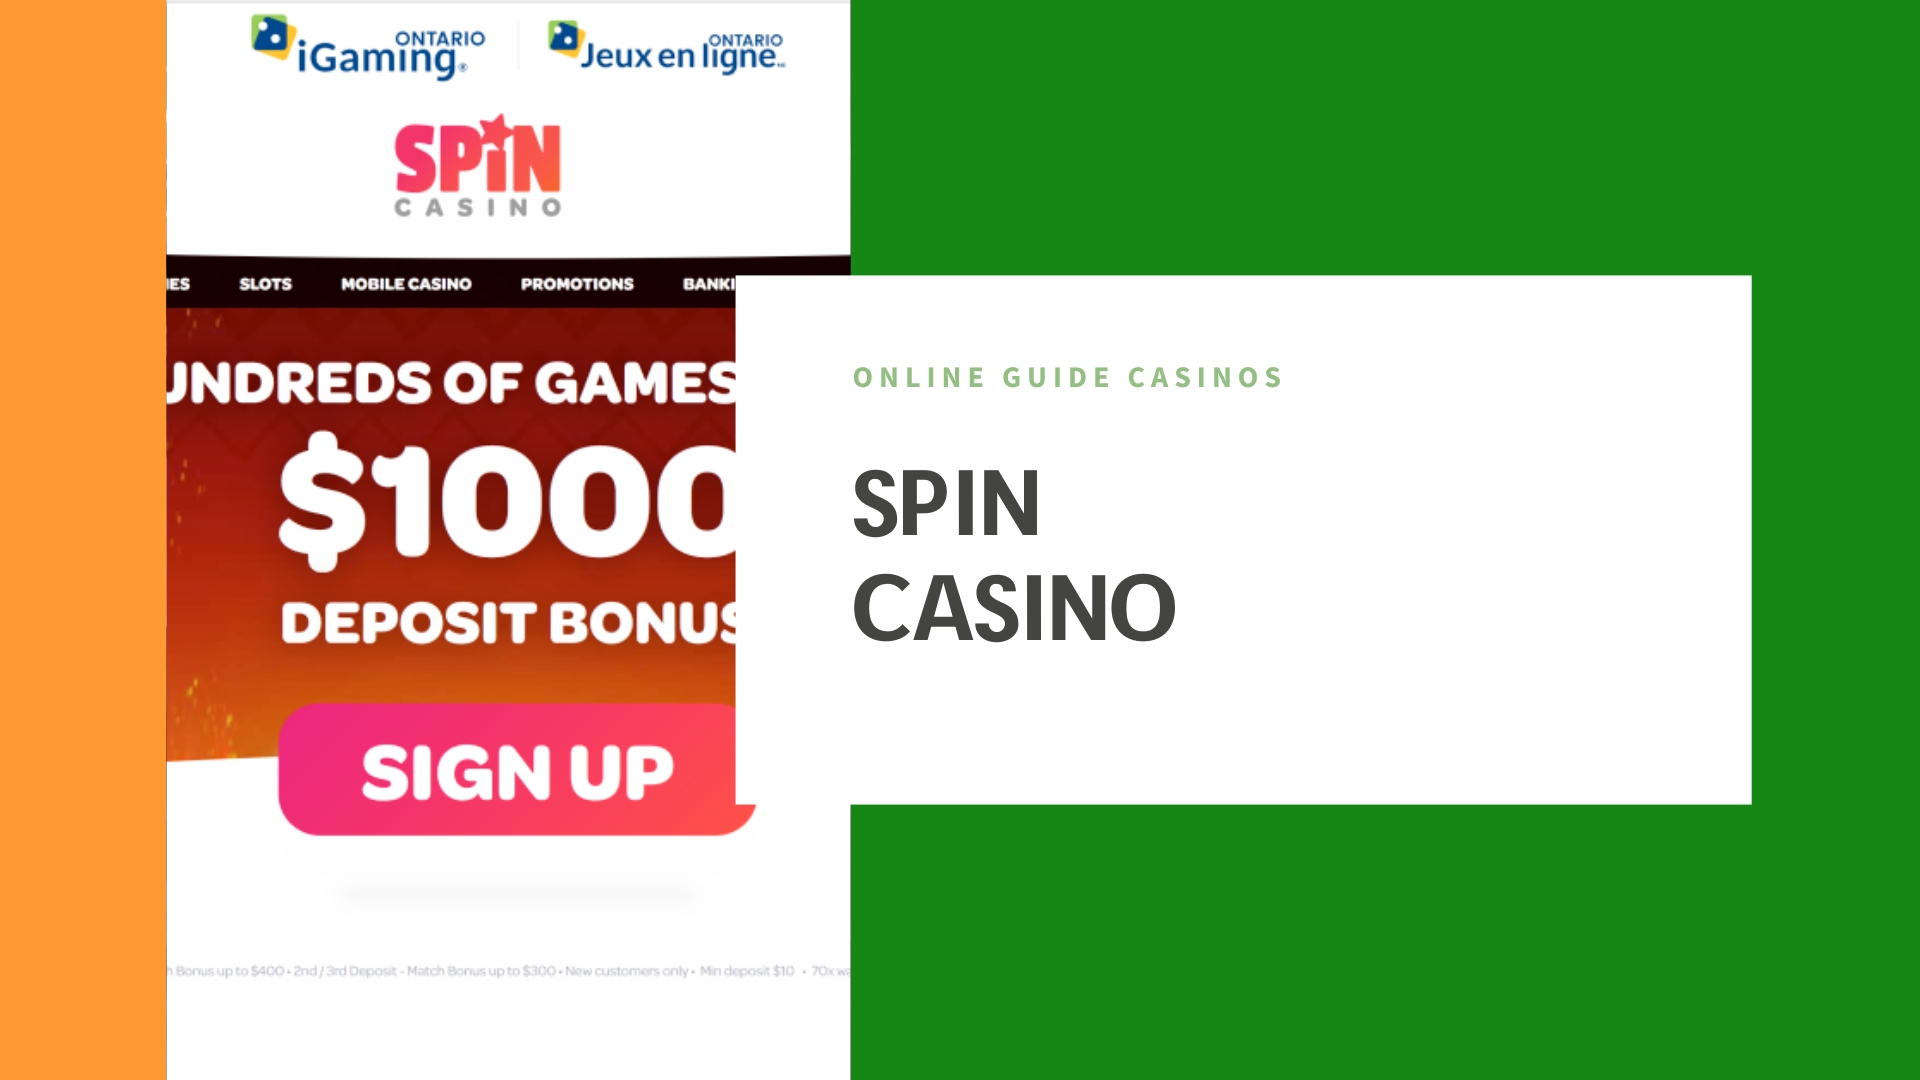 Spin casino review especially for Indian gamblers